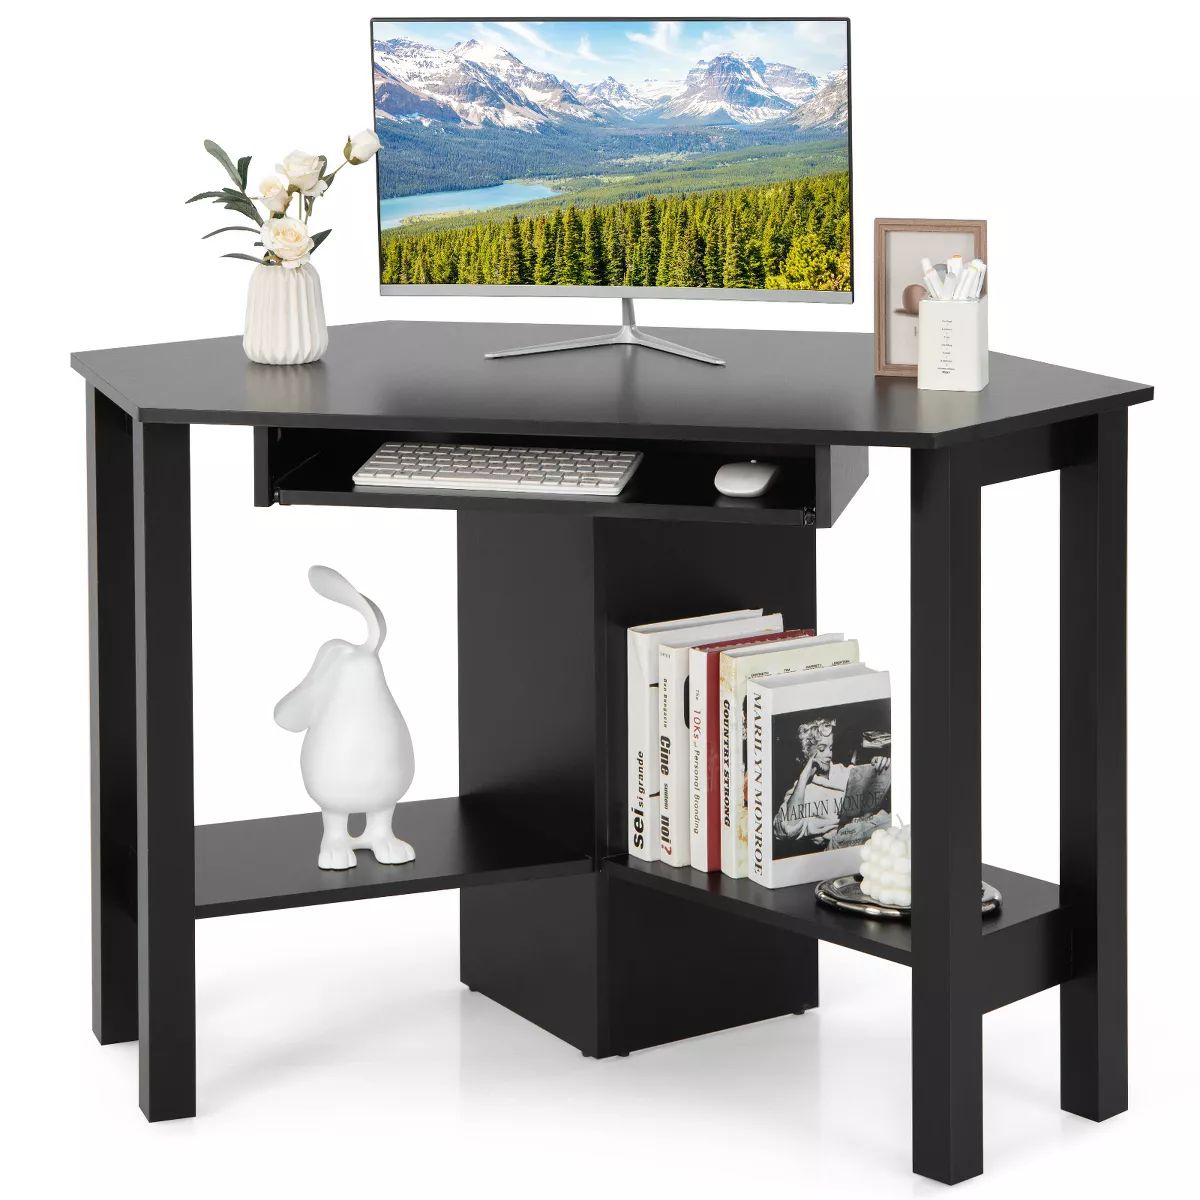 Costway Wooden Corner Desk With Drawer Computer PC Table Study Office Room Black | Target